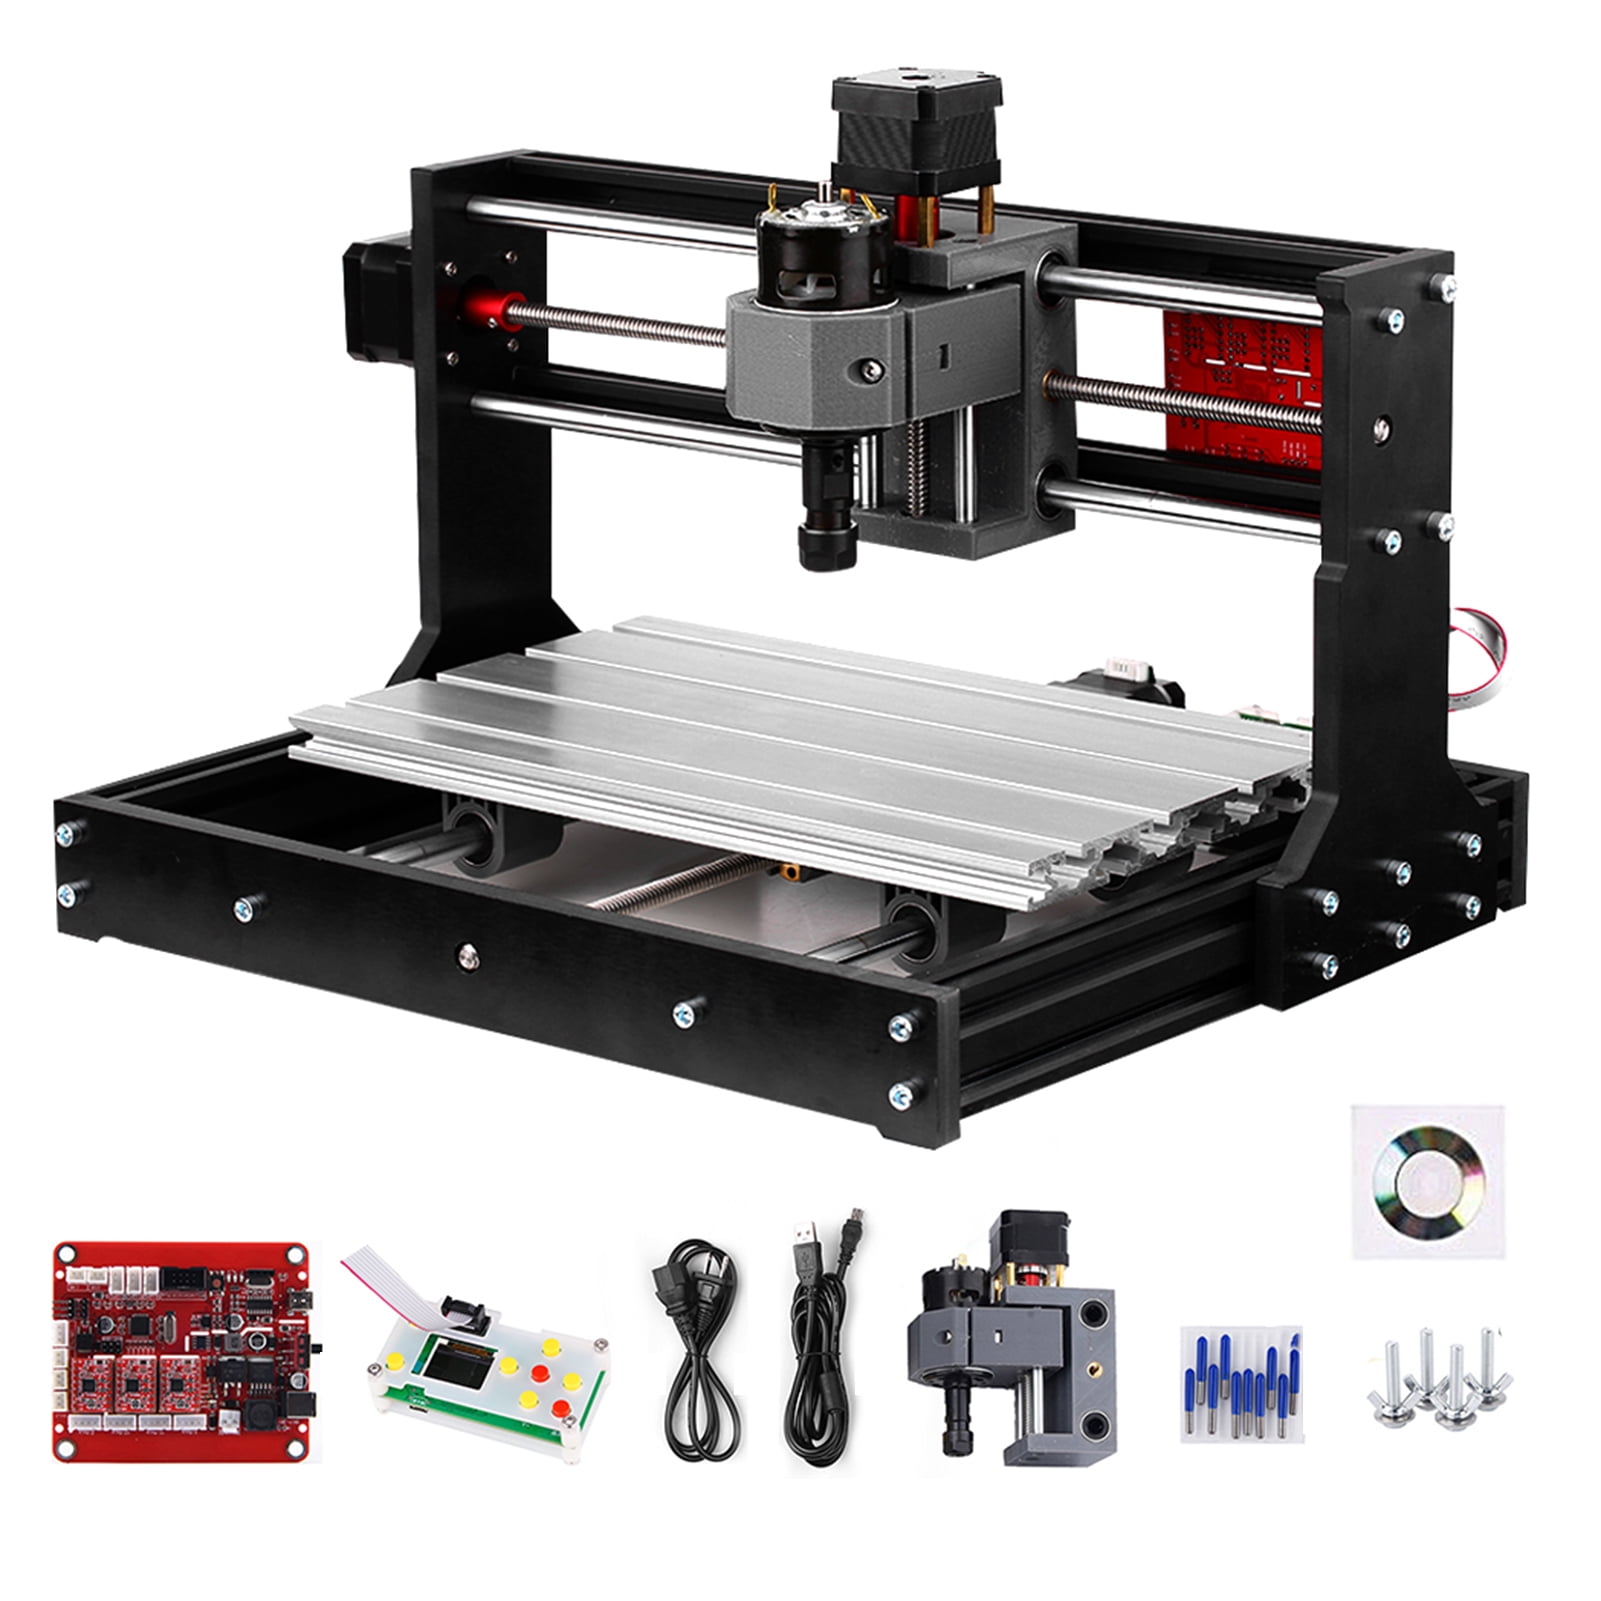 2500mW 3 Axis CNC  Router PCB 2418 Wood Carving Engraving Milling Laser Machine 